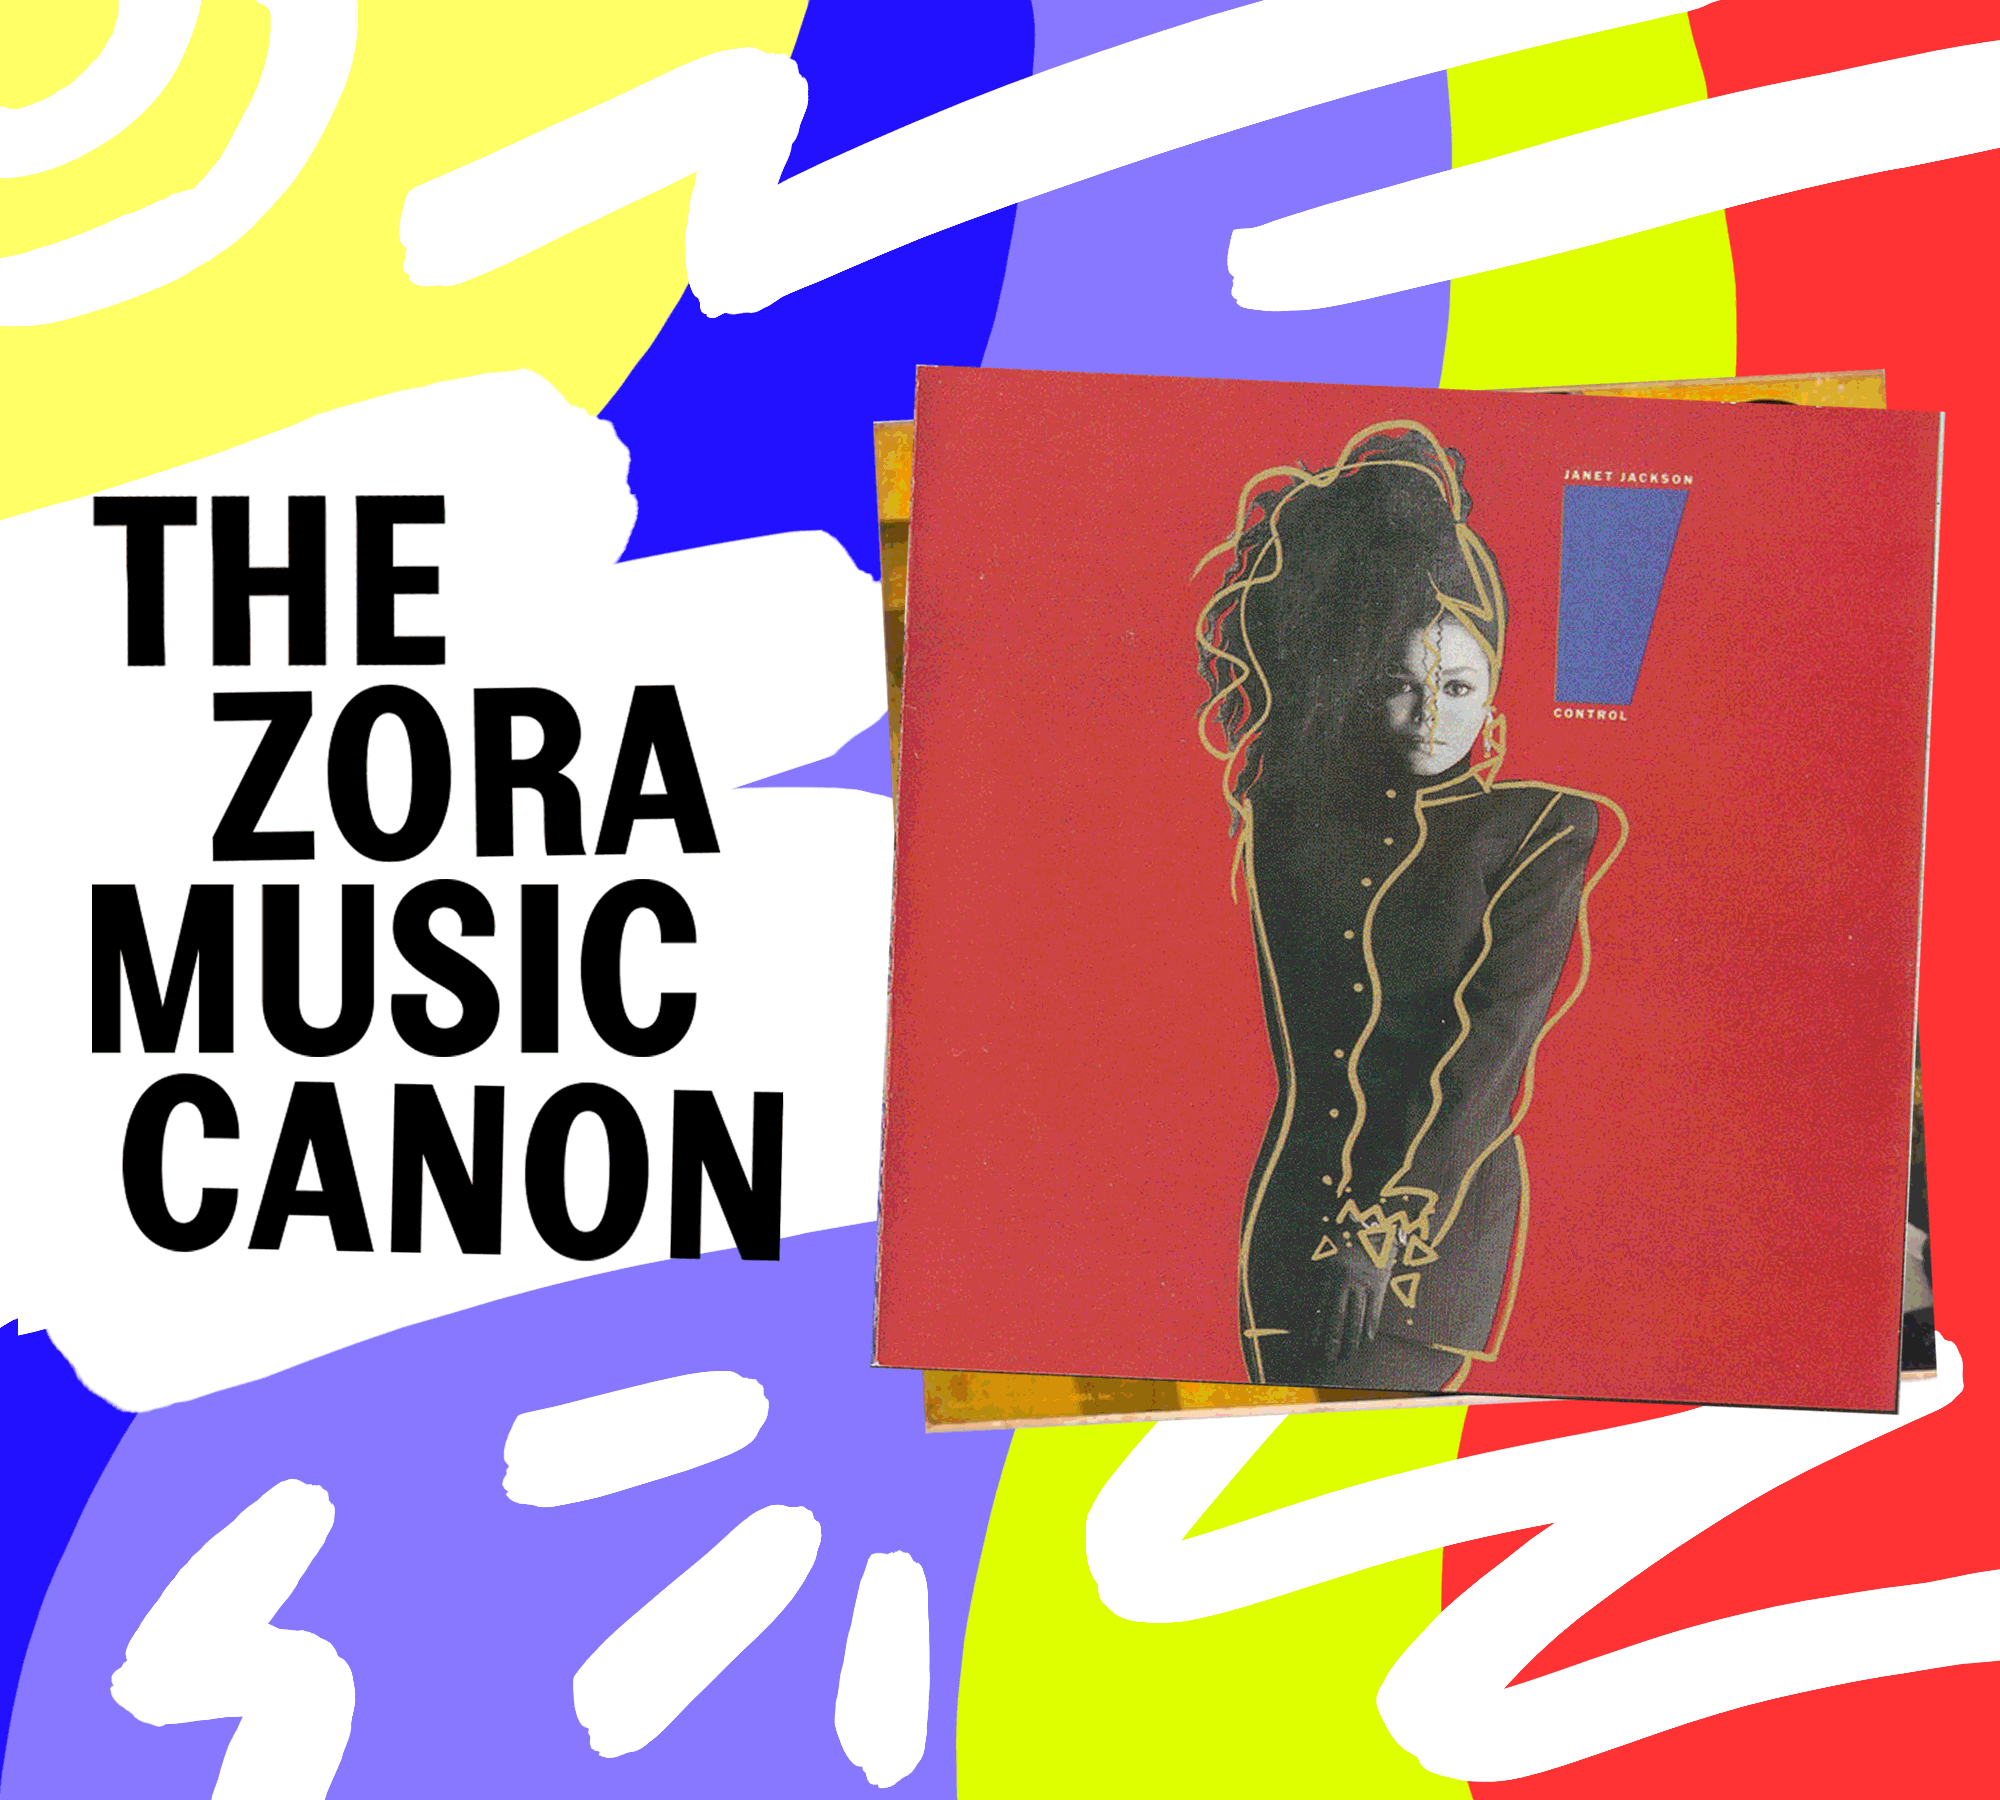 A lively image that says “The ZORA Music Canon” with several acclaimed album covers by Black women animated  as a gif.